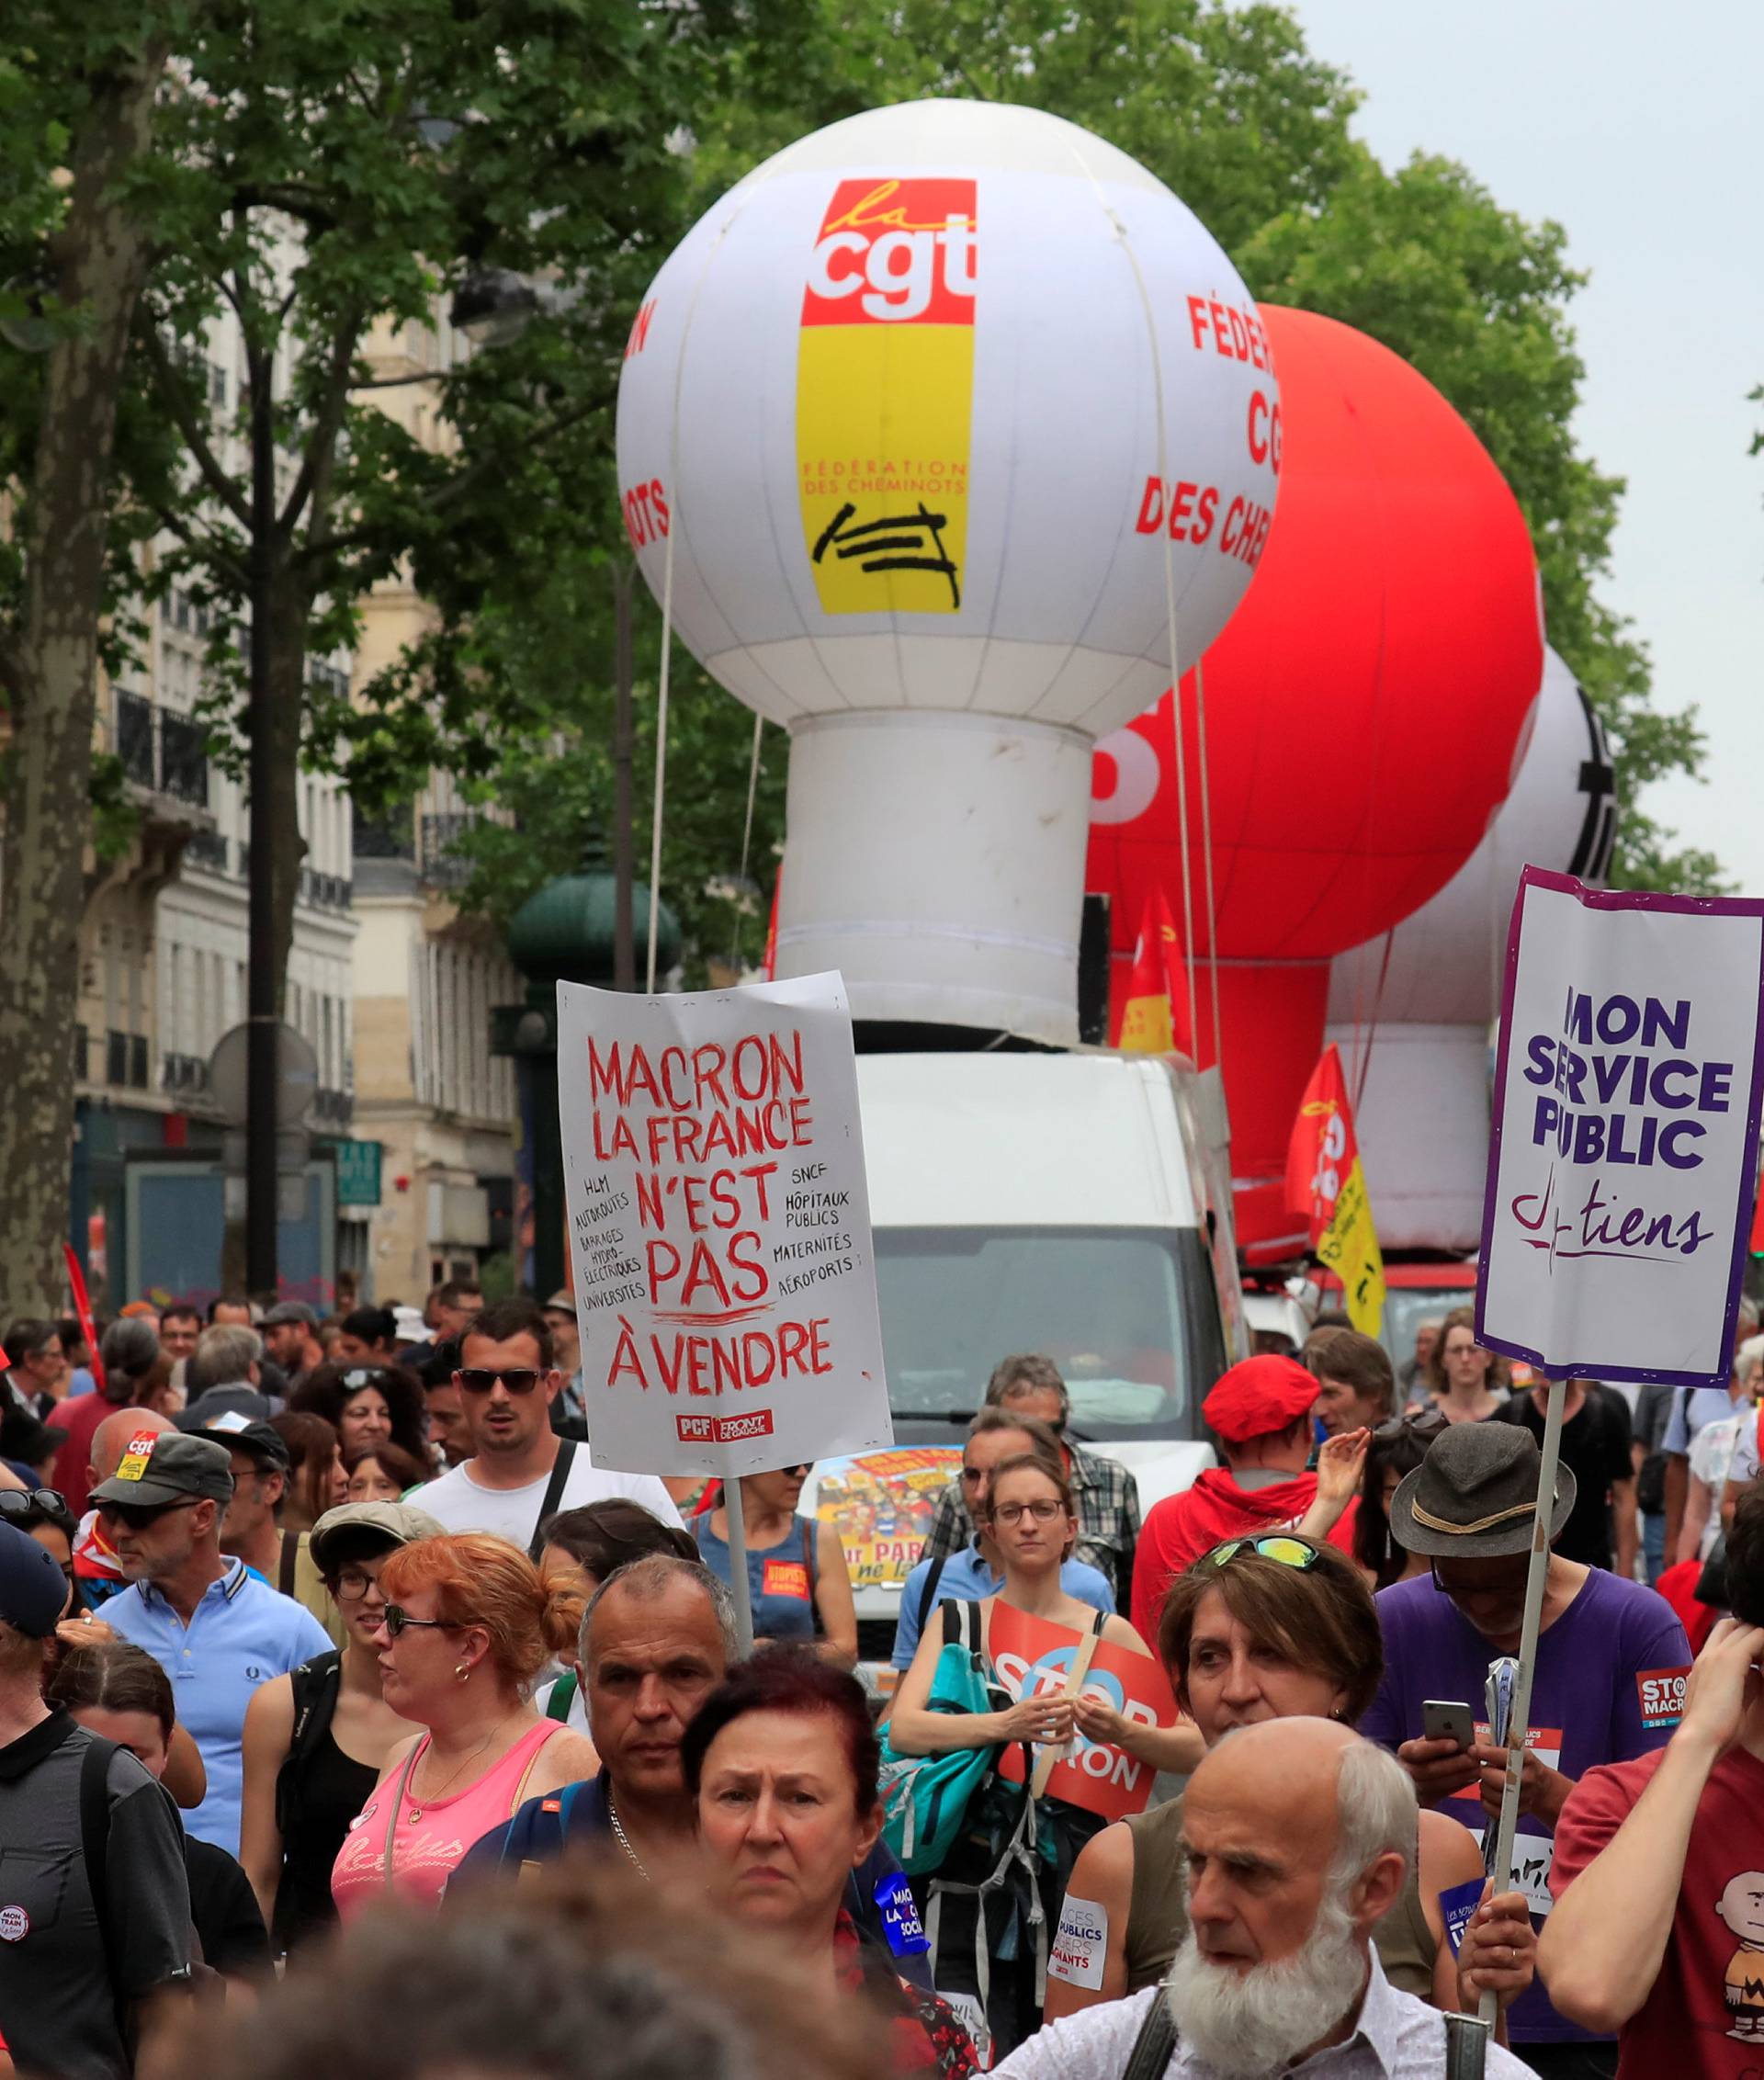 Protesters hold placards during a demonstration by French unions and France Insoumise" (France Unbowed) political party to protest against government reforms, in Paris